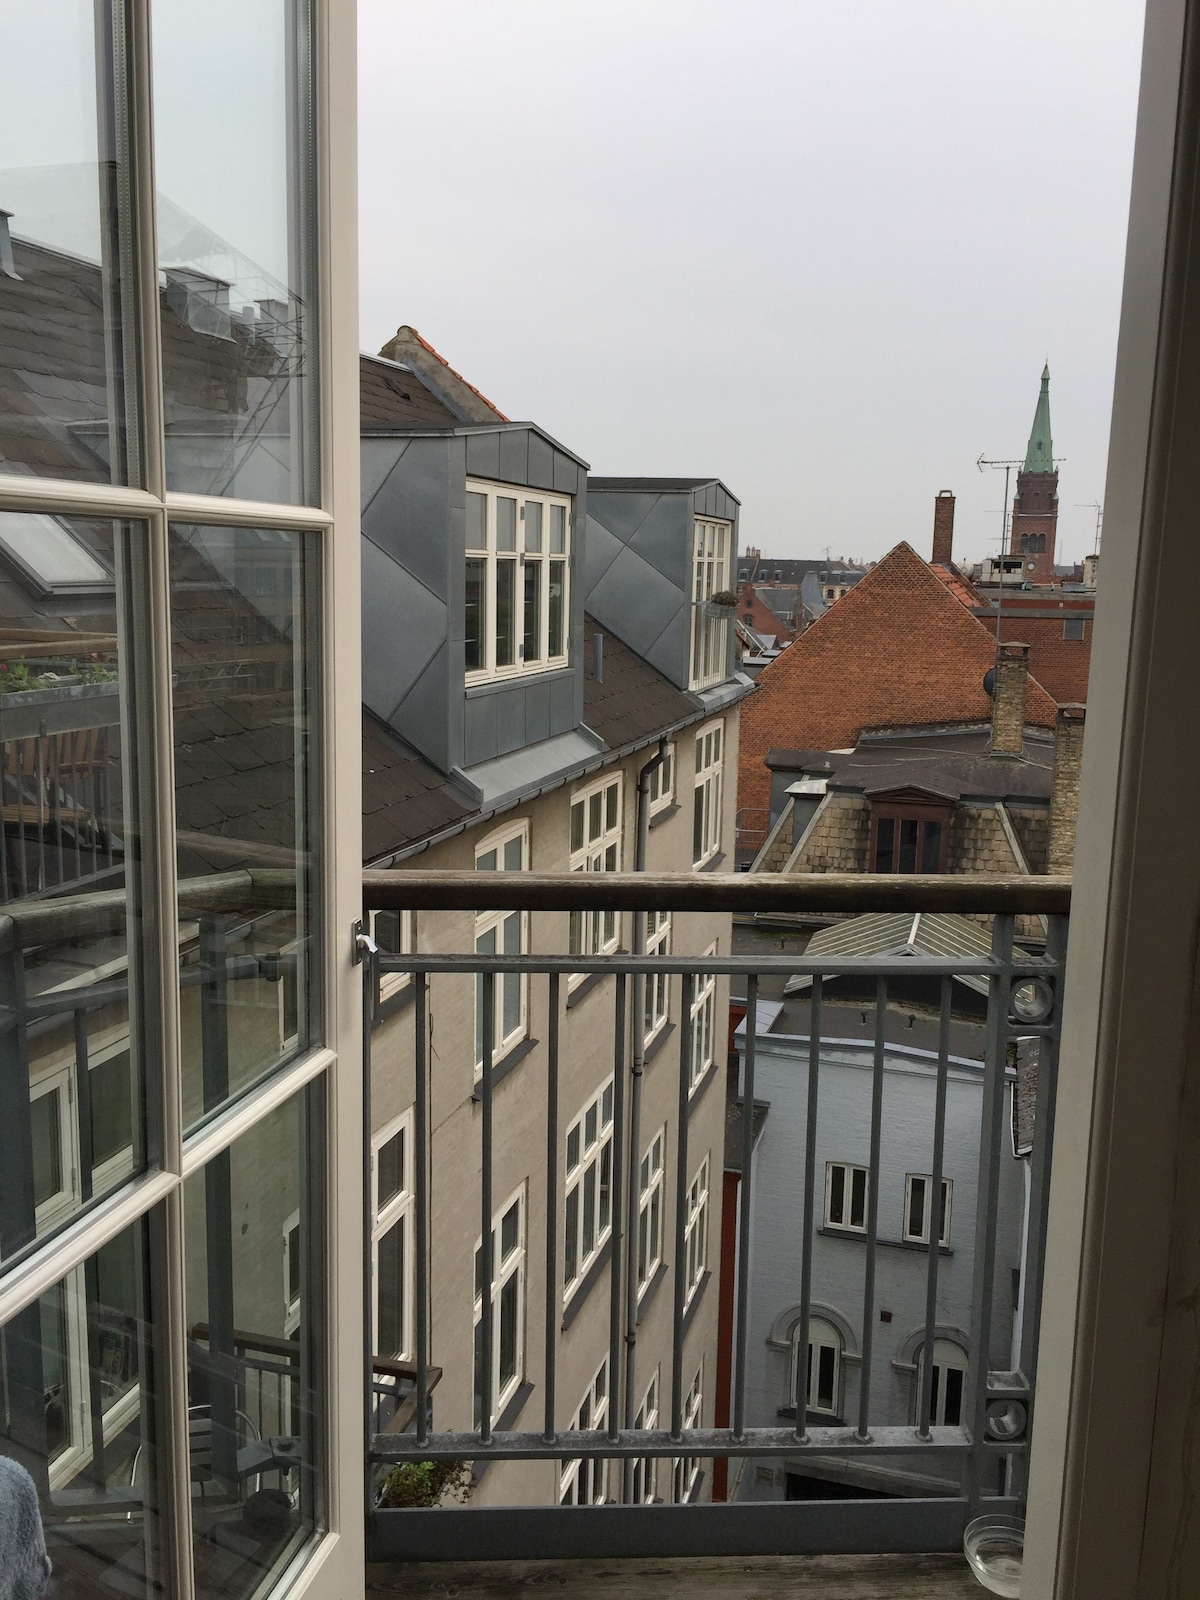 115 m2 Penthouse in the sweet spot of Vesterbro